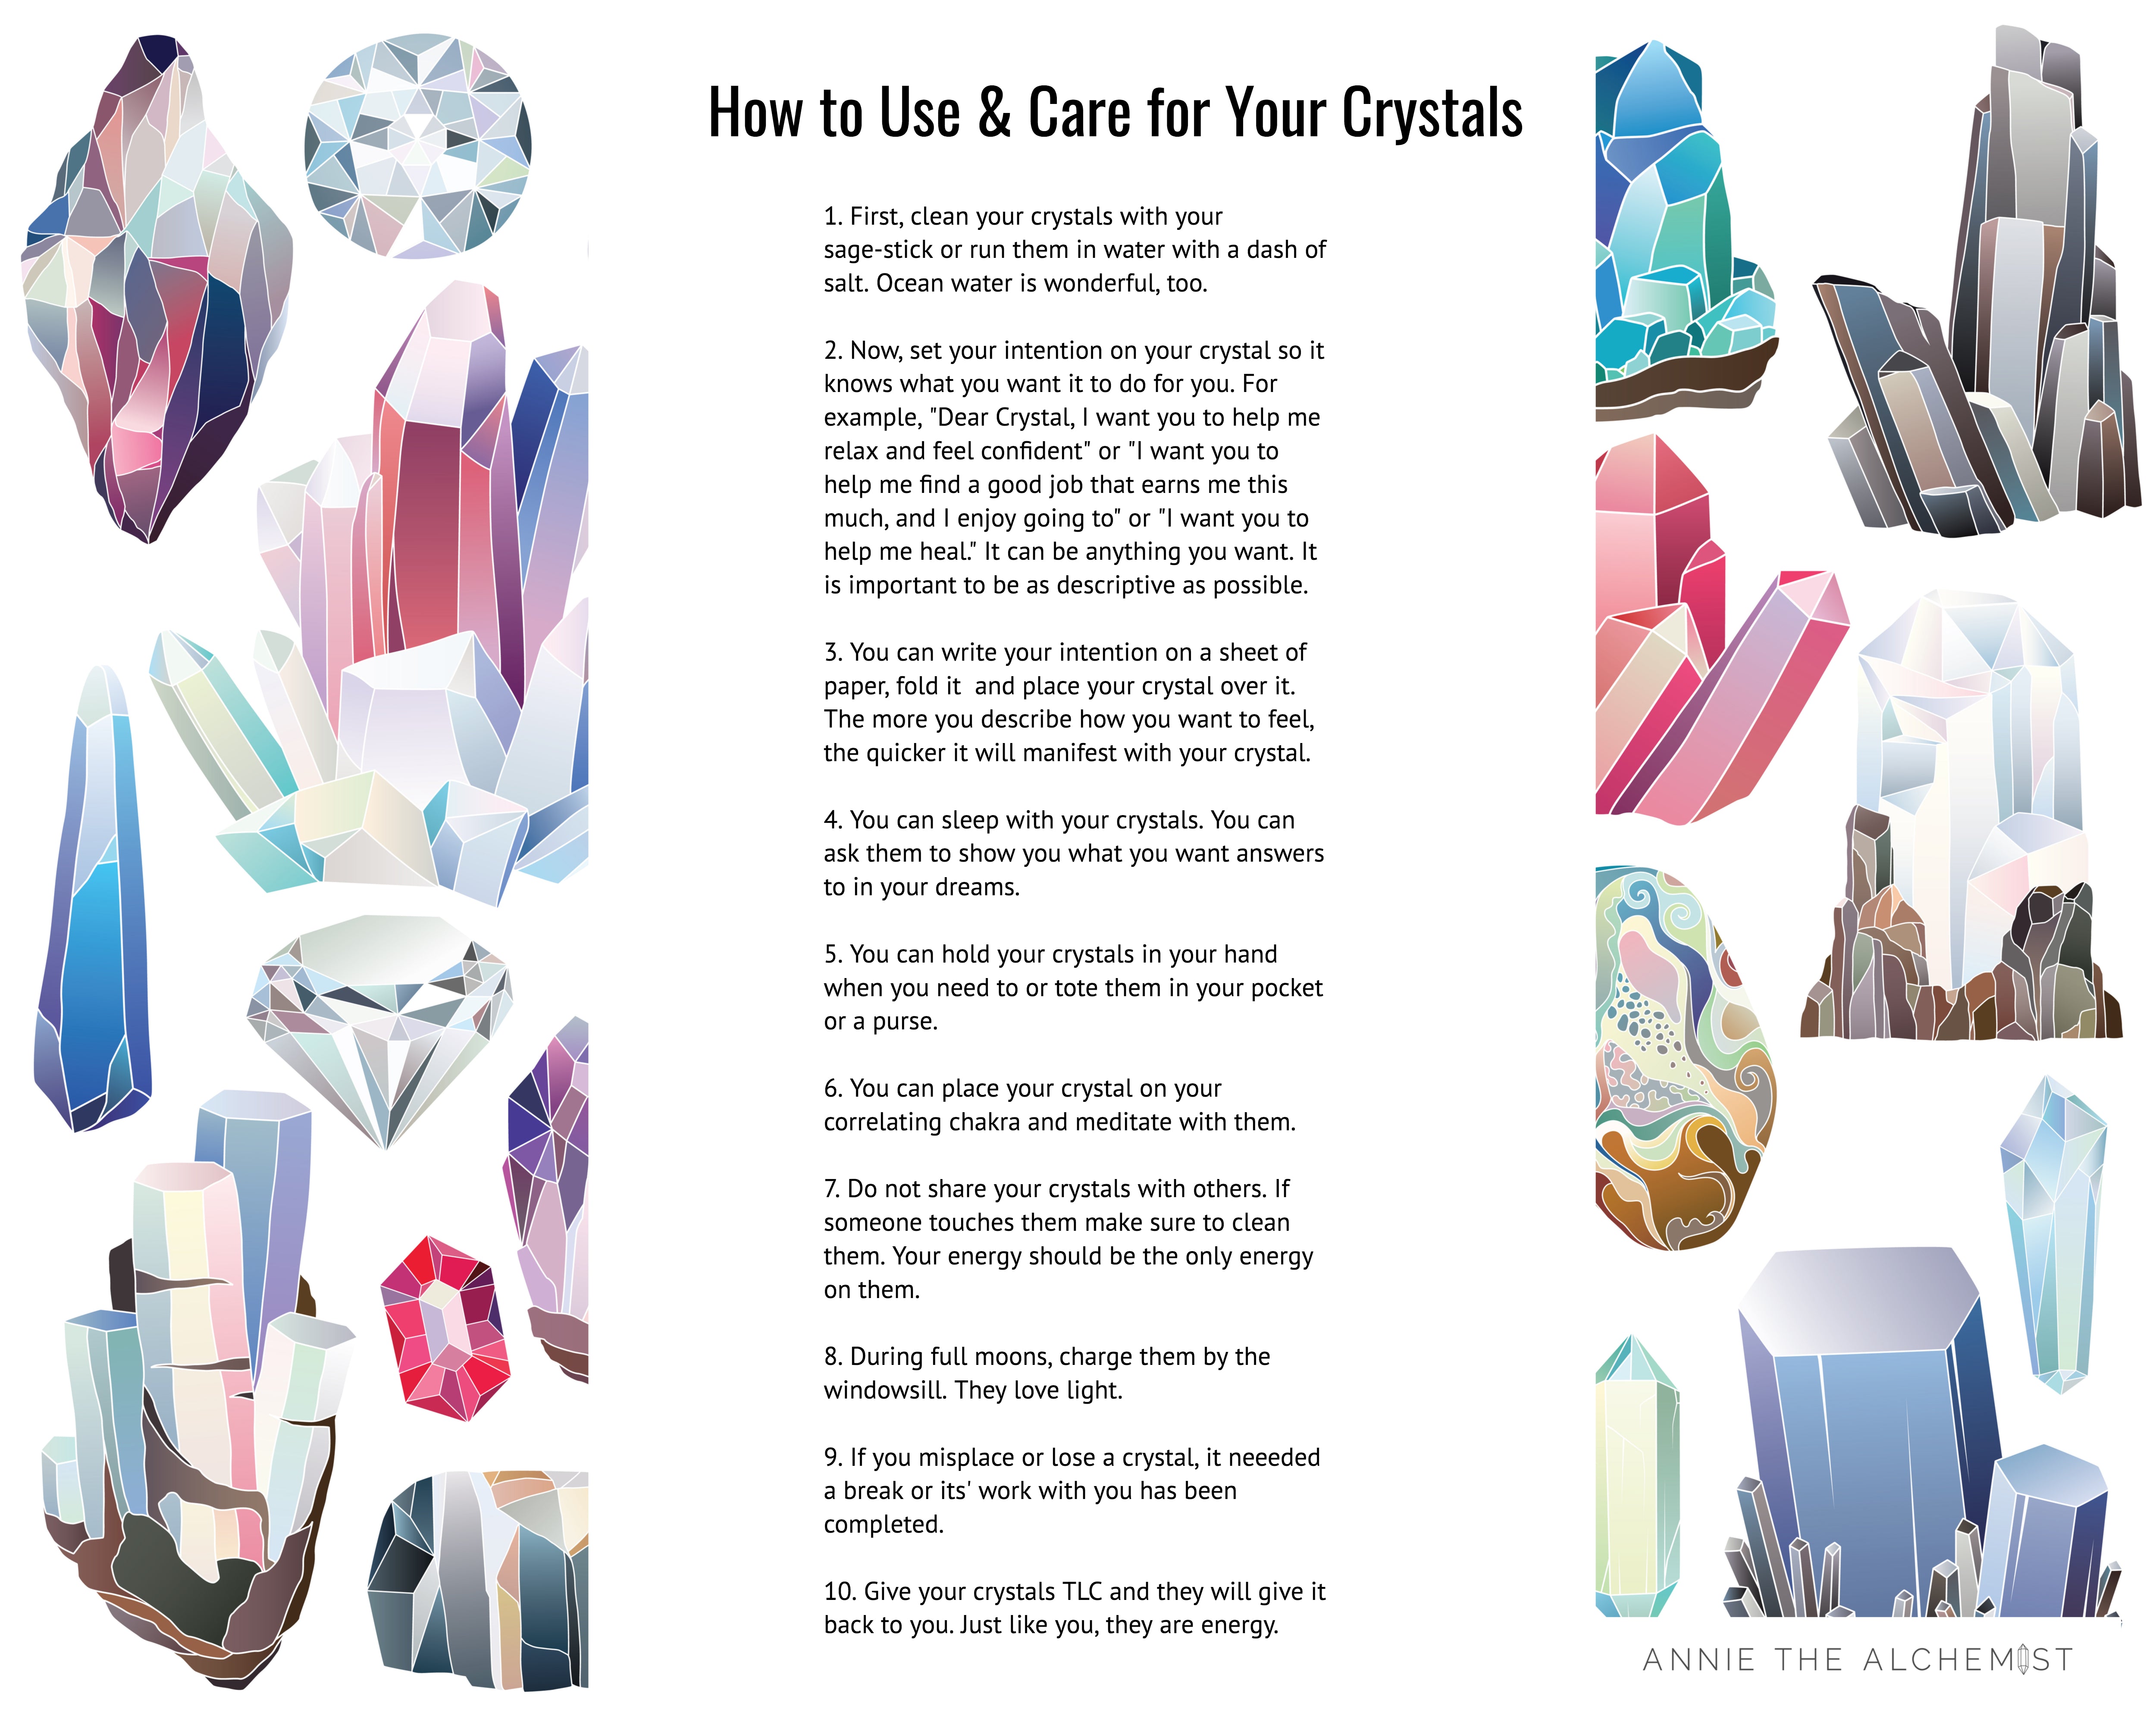 Annie The Alchemist's Downloadable: Guide On How to Use & Take Care of Crystals